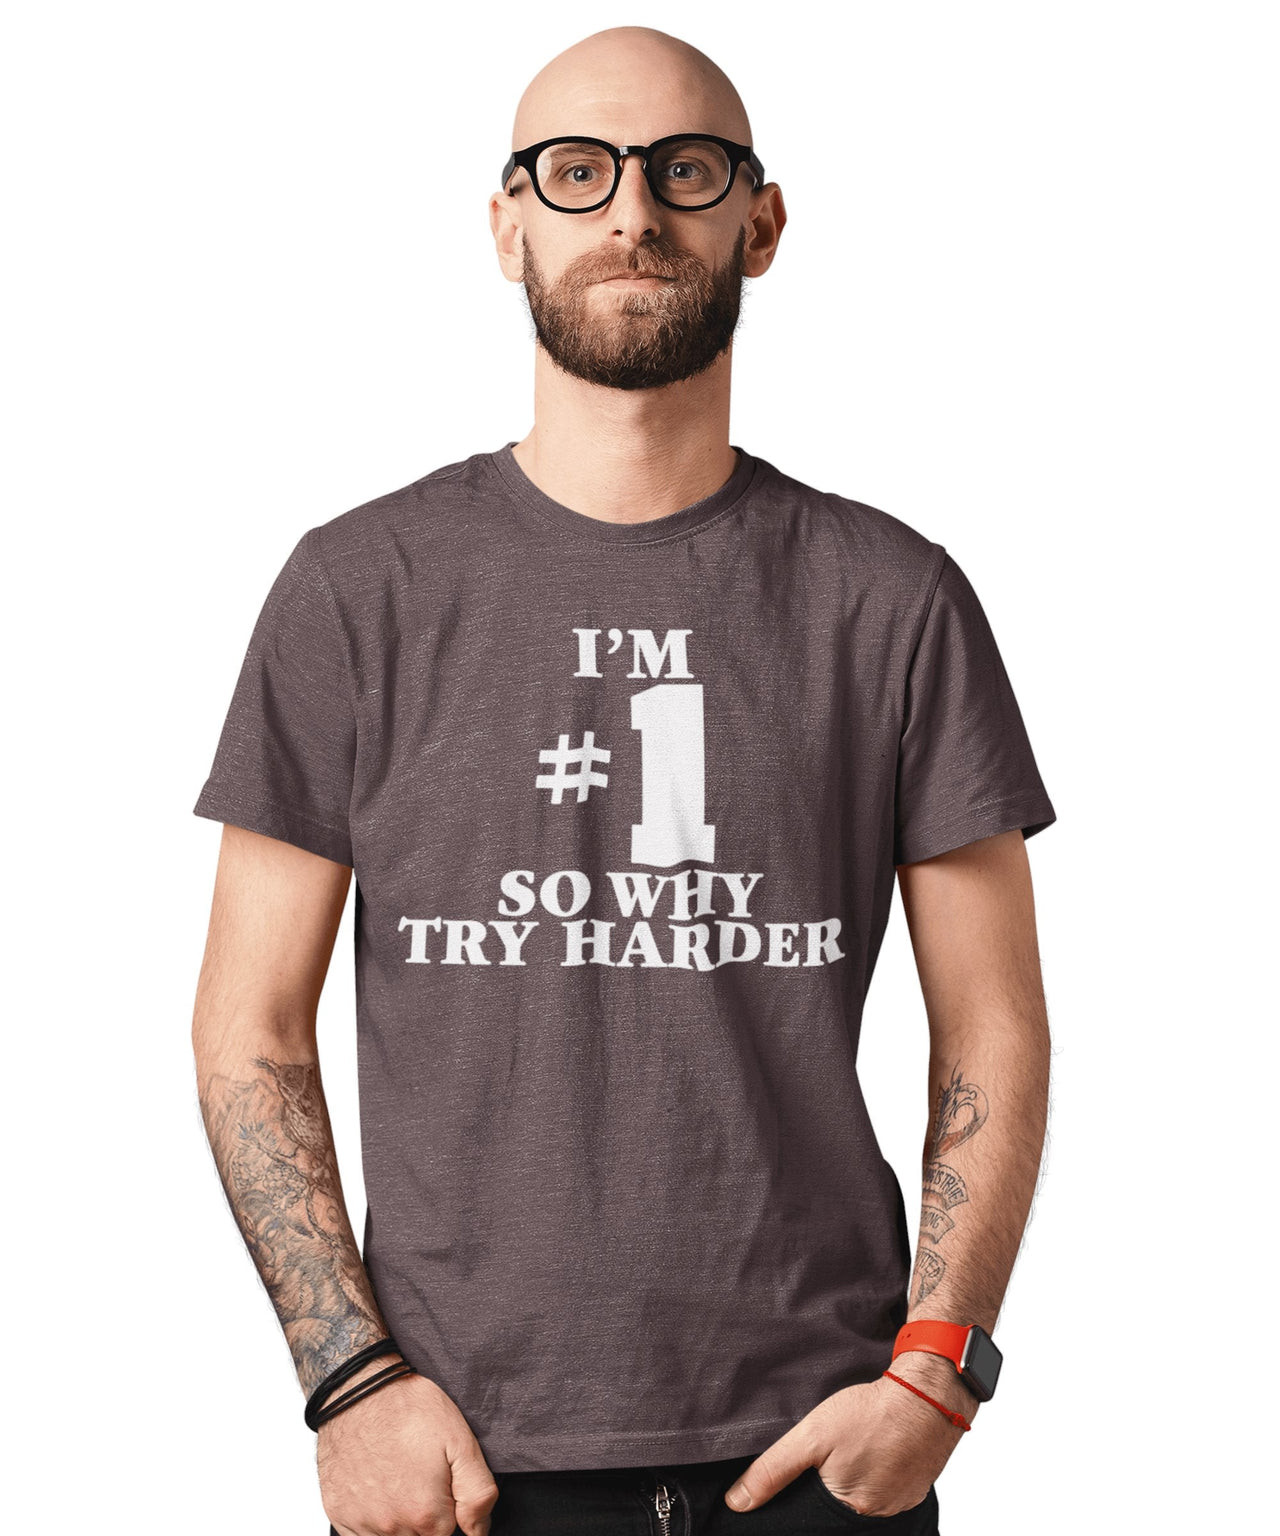 I'm Number 1 Graphic T-Shirt For Men, Inspired By Fat Boy Slim 8Ball